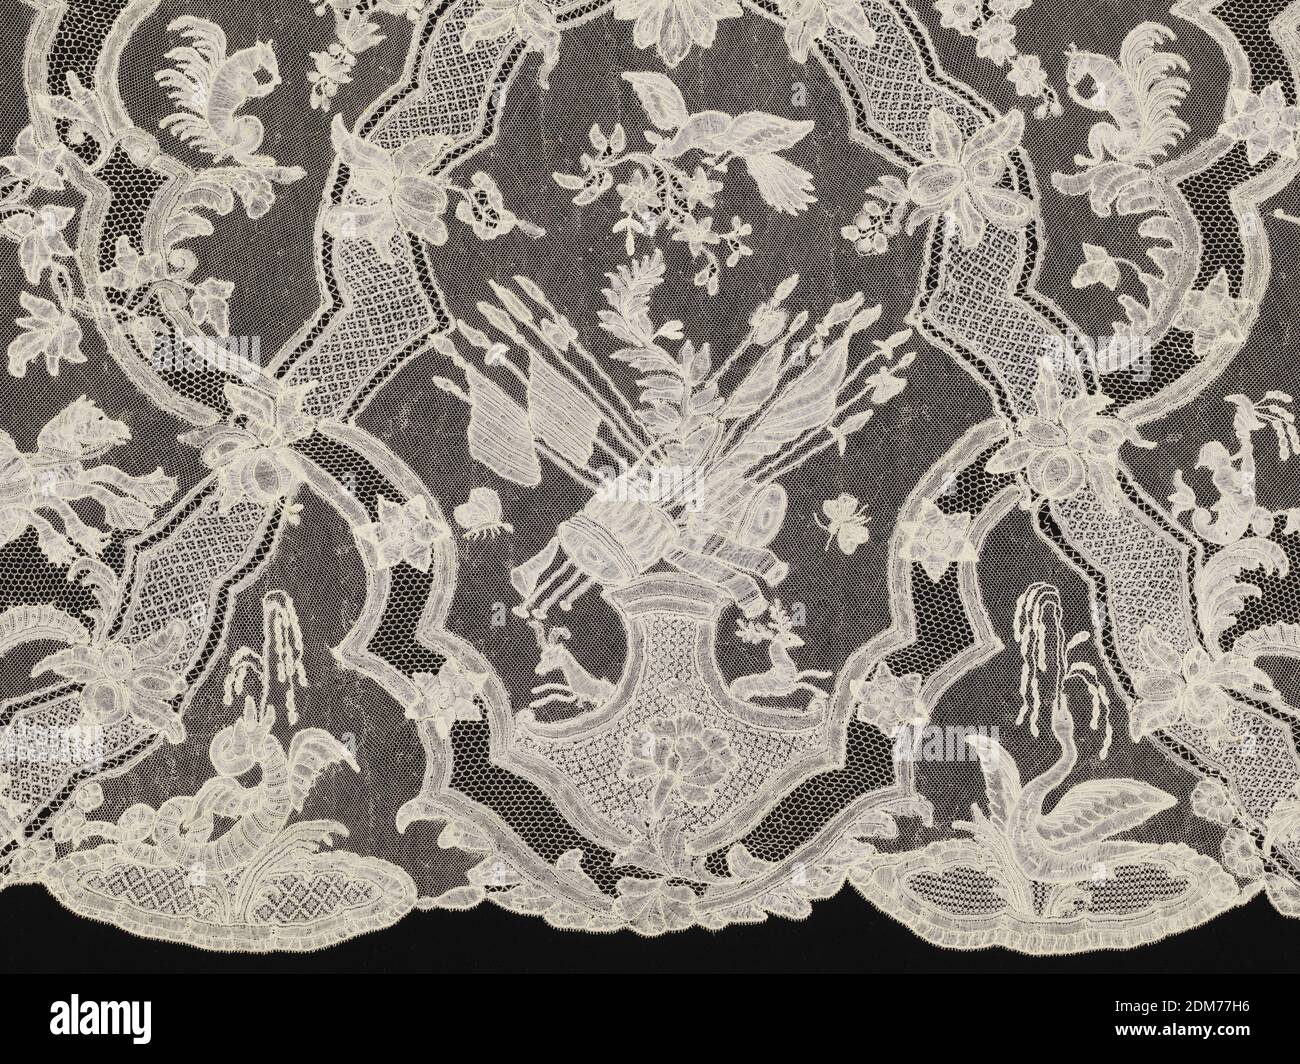 Flounce, Medium: linen Technique: Brussels style bobbin lace, Section of a wide flounce with a design of curving garlands that alternates with a symmetrical framing element. Neptune with a trident alternates with a group of heraldic banners with field drums., Belgium, 1745–65, lace, Flounce Stock Photo